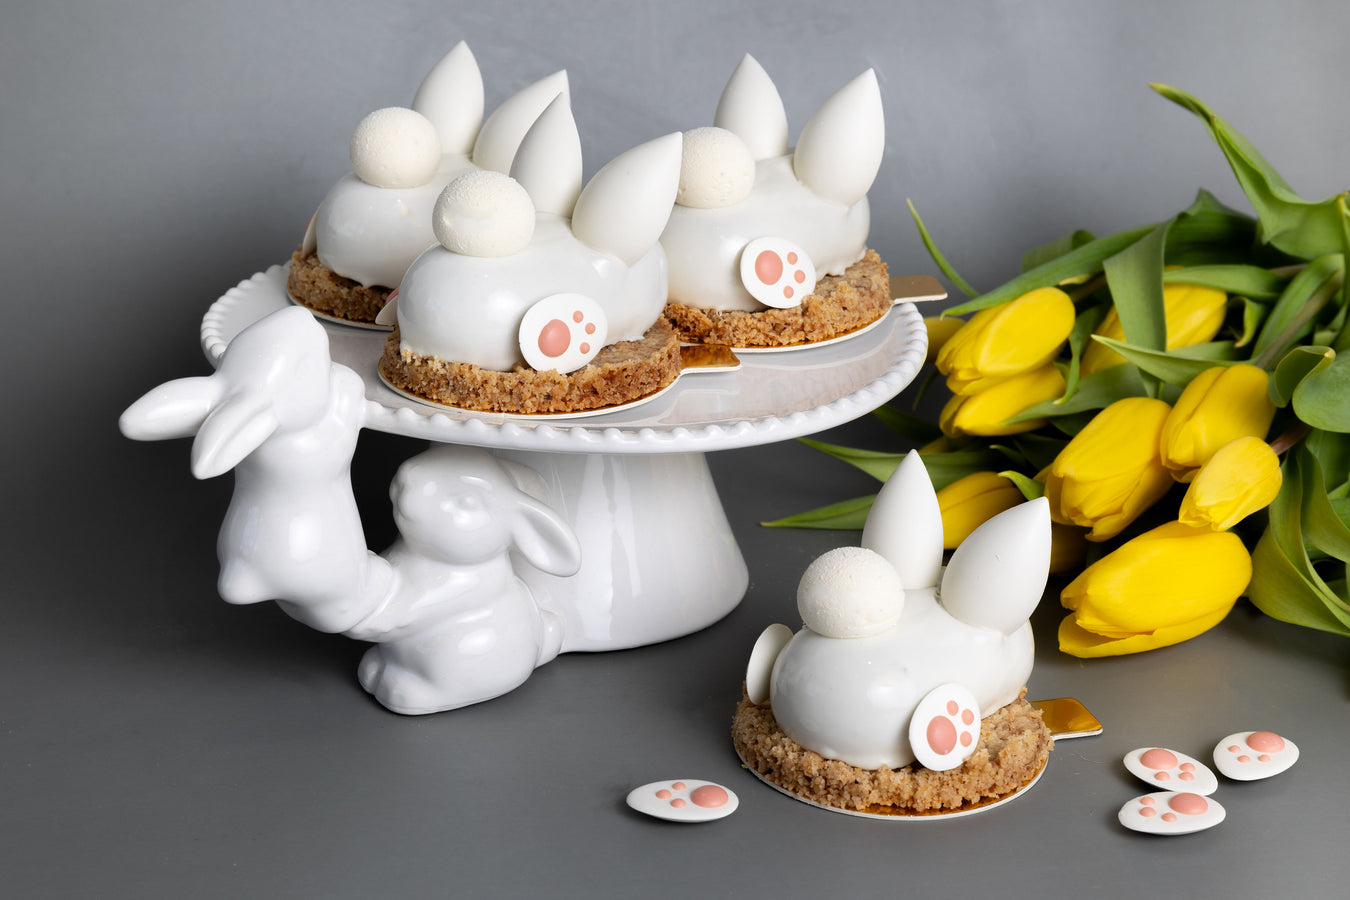 Top rated Easter dessert cakes in Burnaby and White Rock, near Vancouver, BC from Chez Christophe cake shop